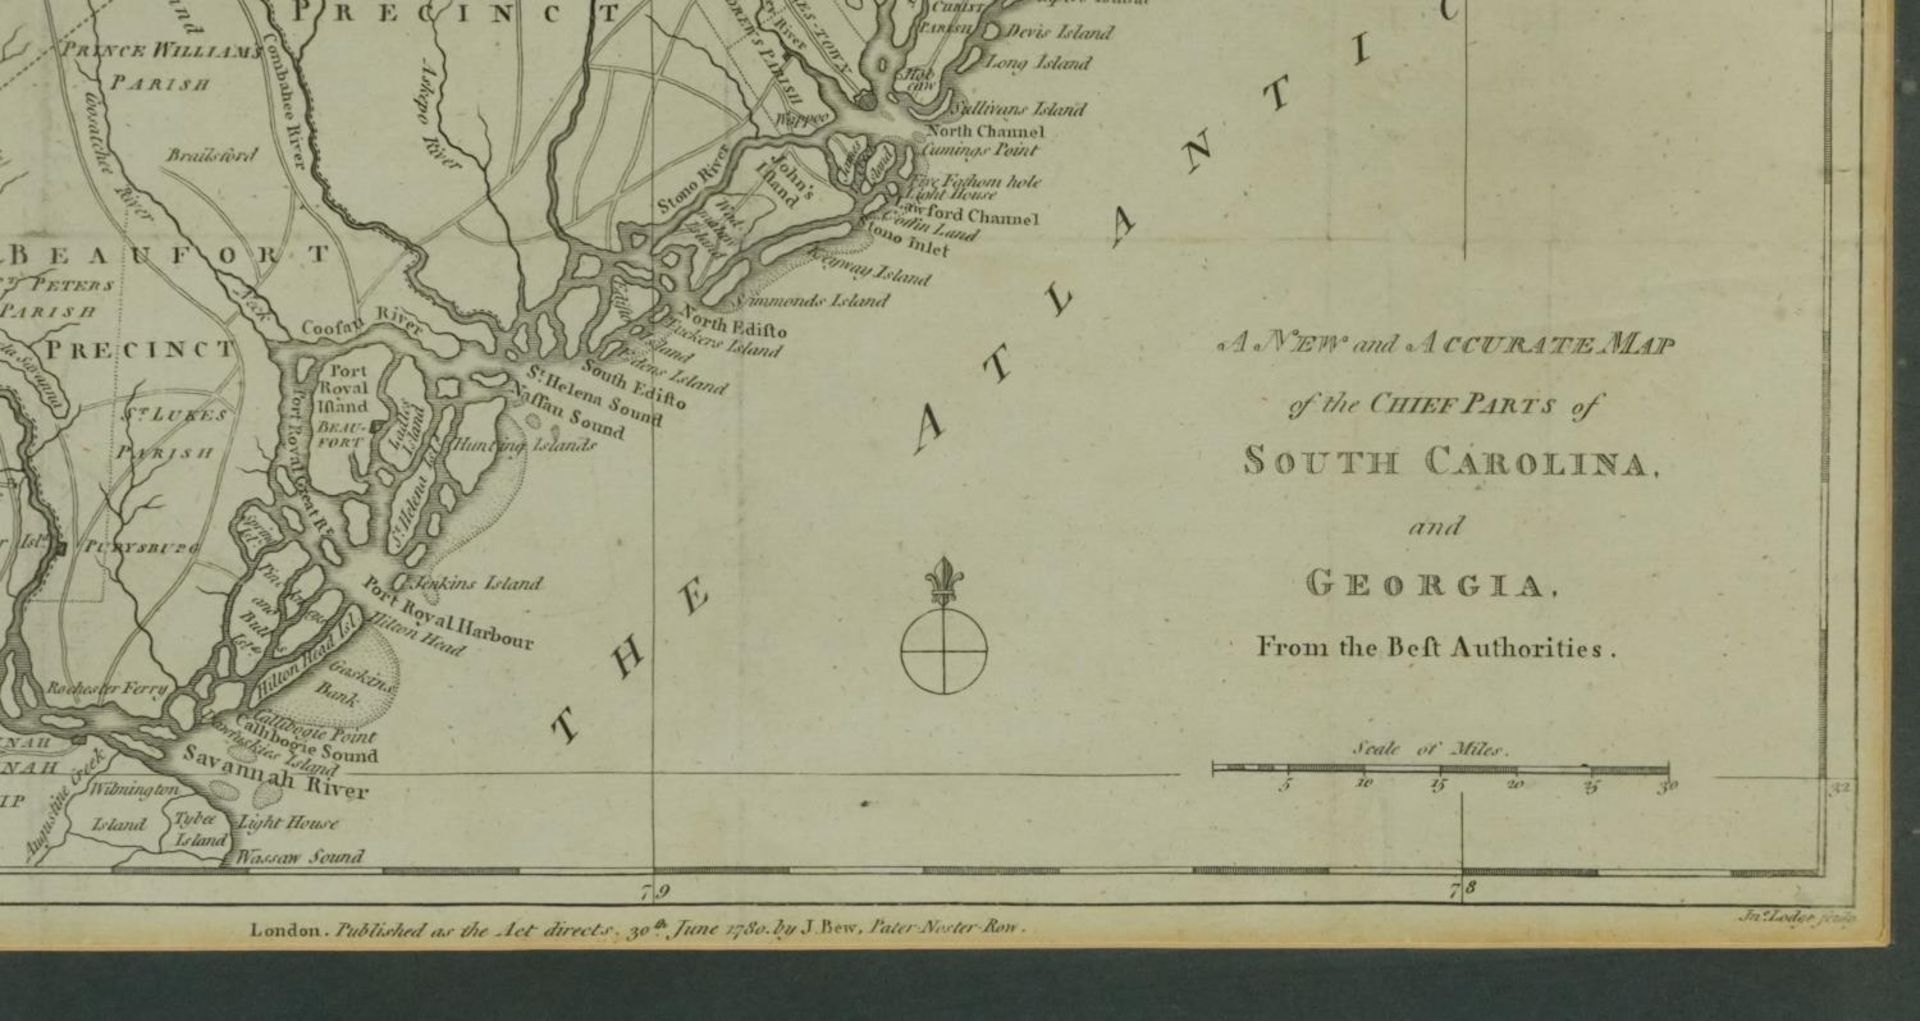 New and Accurate Map of The Chief Parts of South Caroline and Georgia, 18th century map published - Image 3 of 5